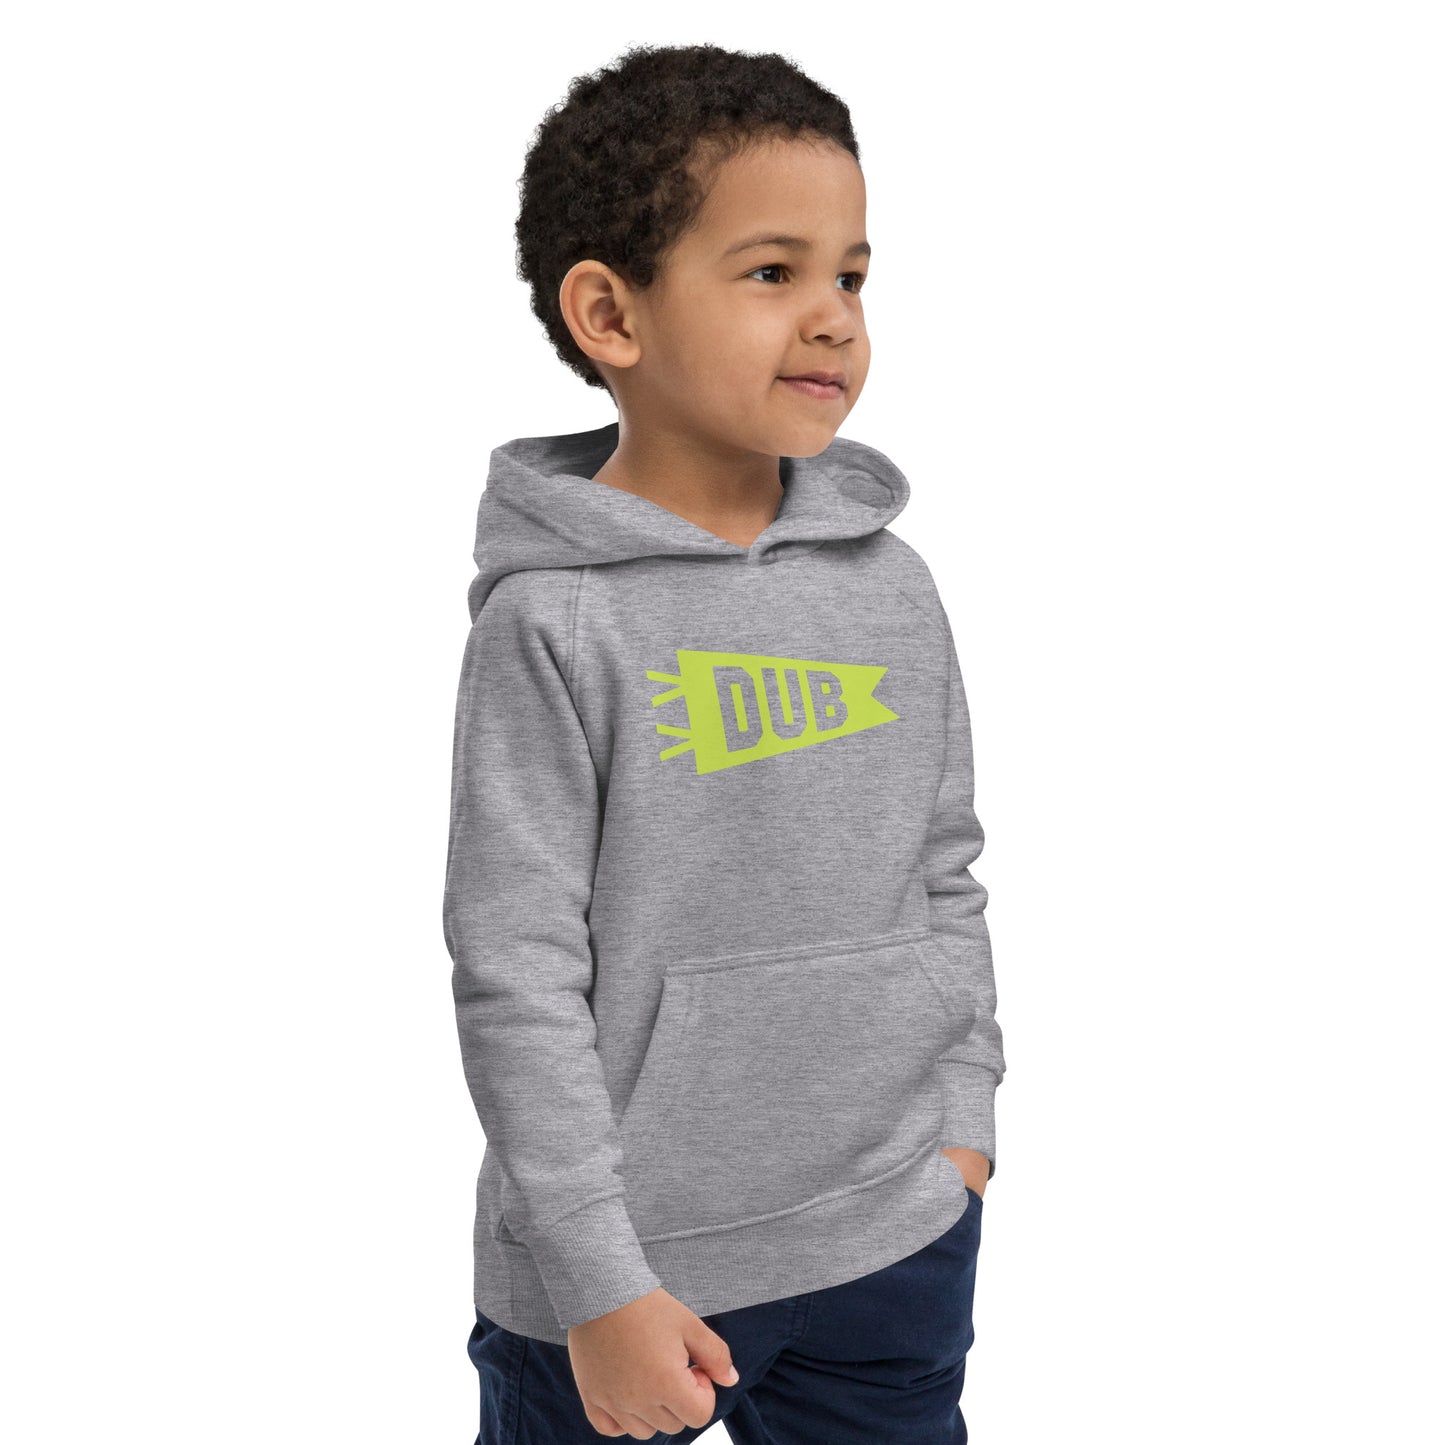 Kid's Sustainable Hoodie - Green Graphic • DUB Dublin • YHM Designs - Image 13